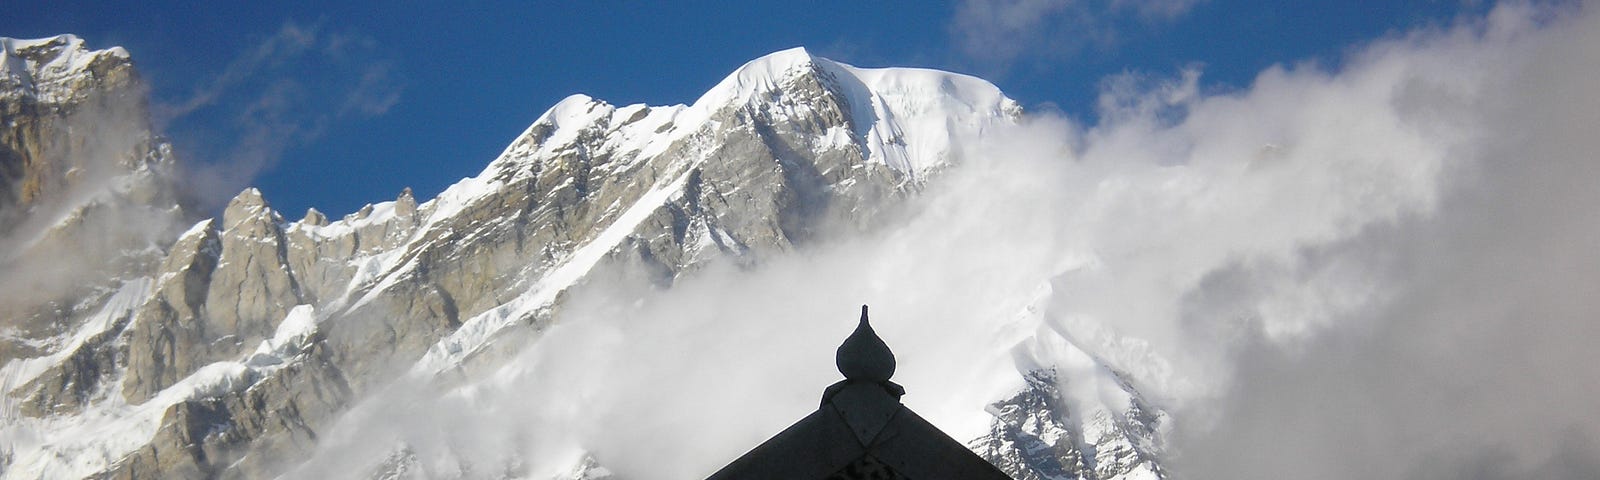 A temple in front of the snow-clad peaks.